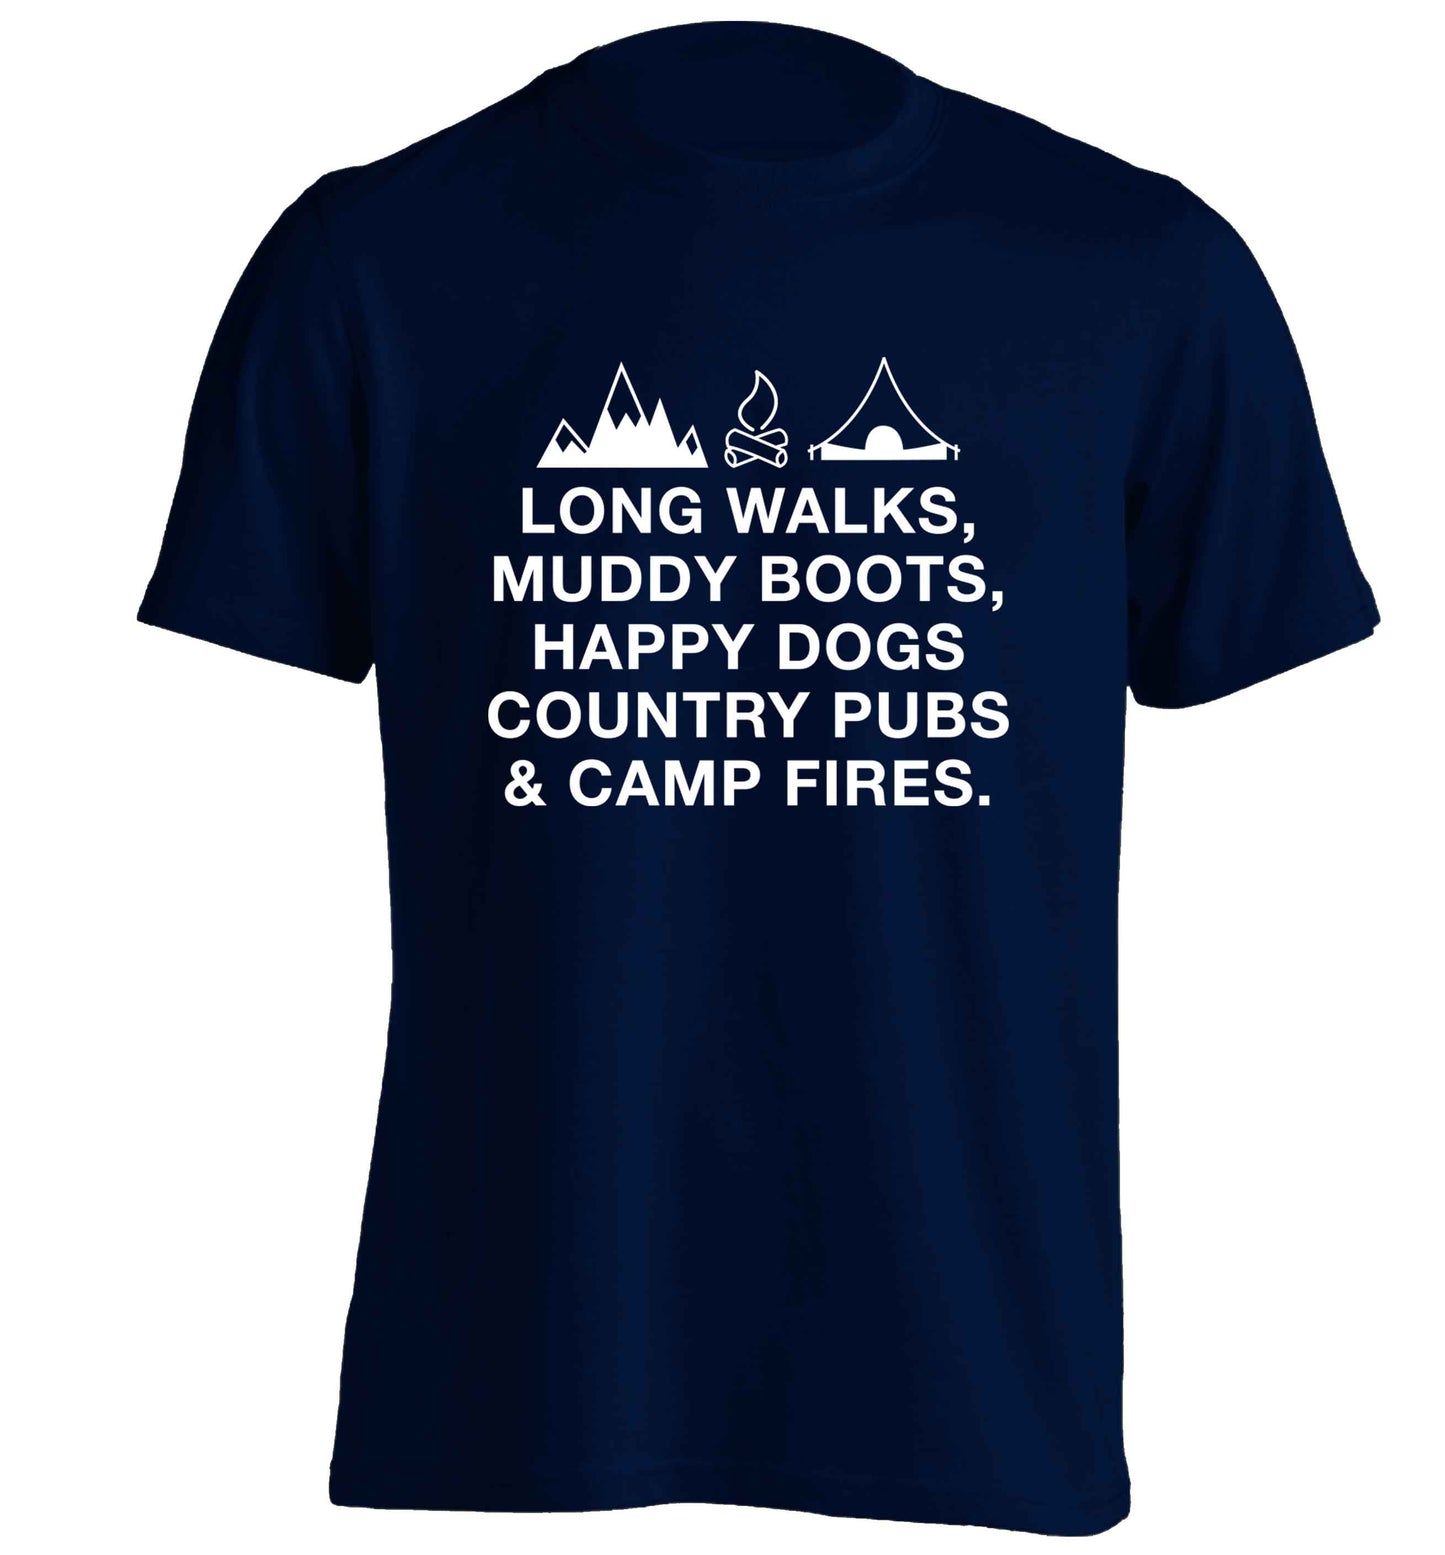 Long walks muddy boots happy dogs country pubs and camp fires adults unisex navy Tshirt 2XL